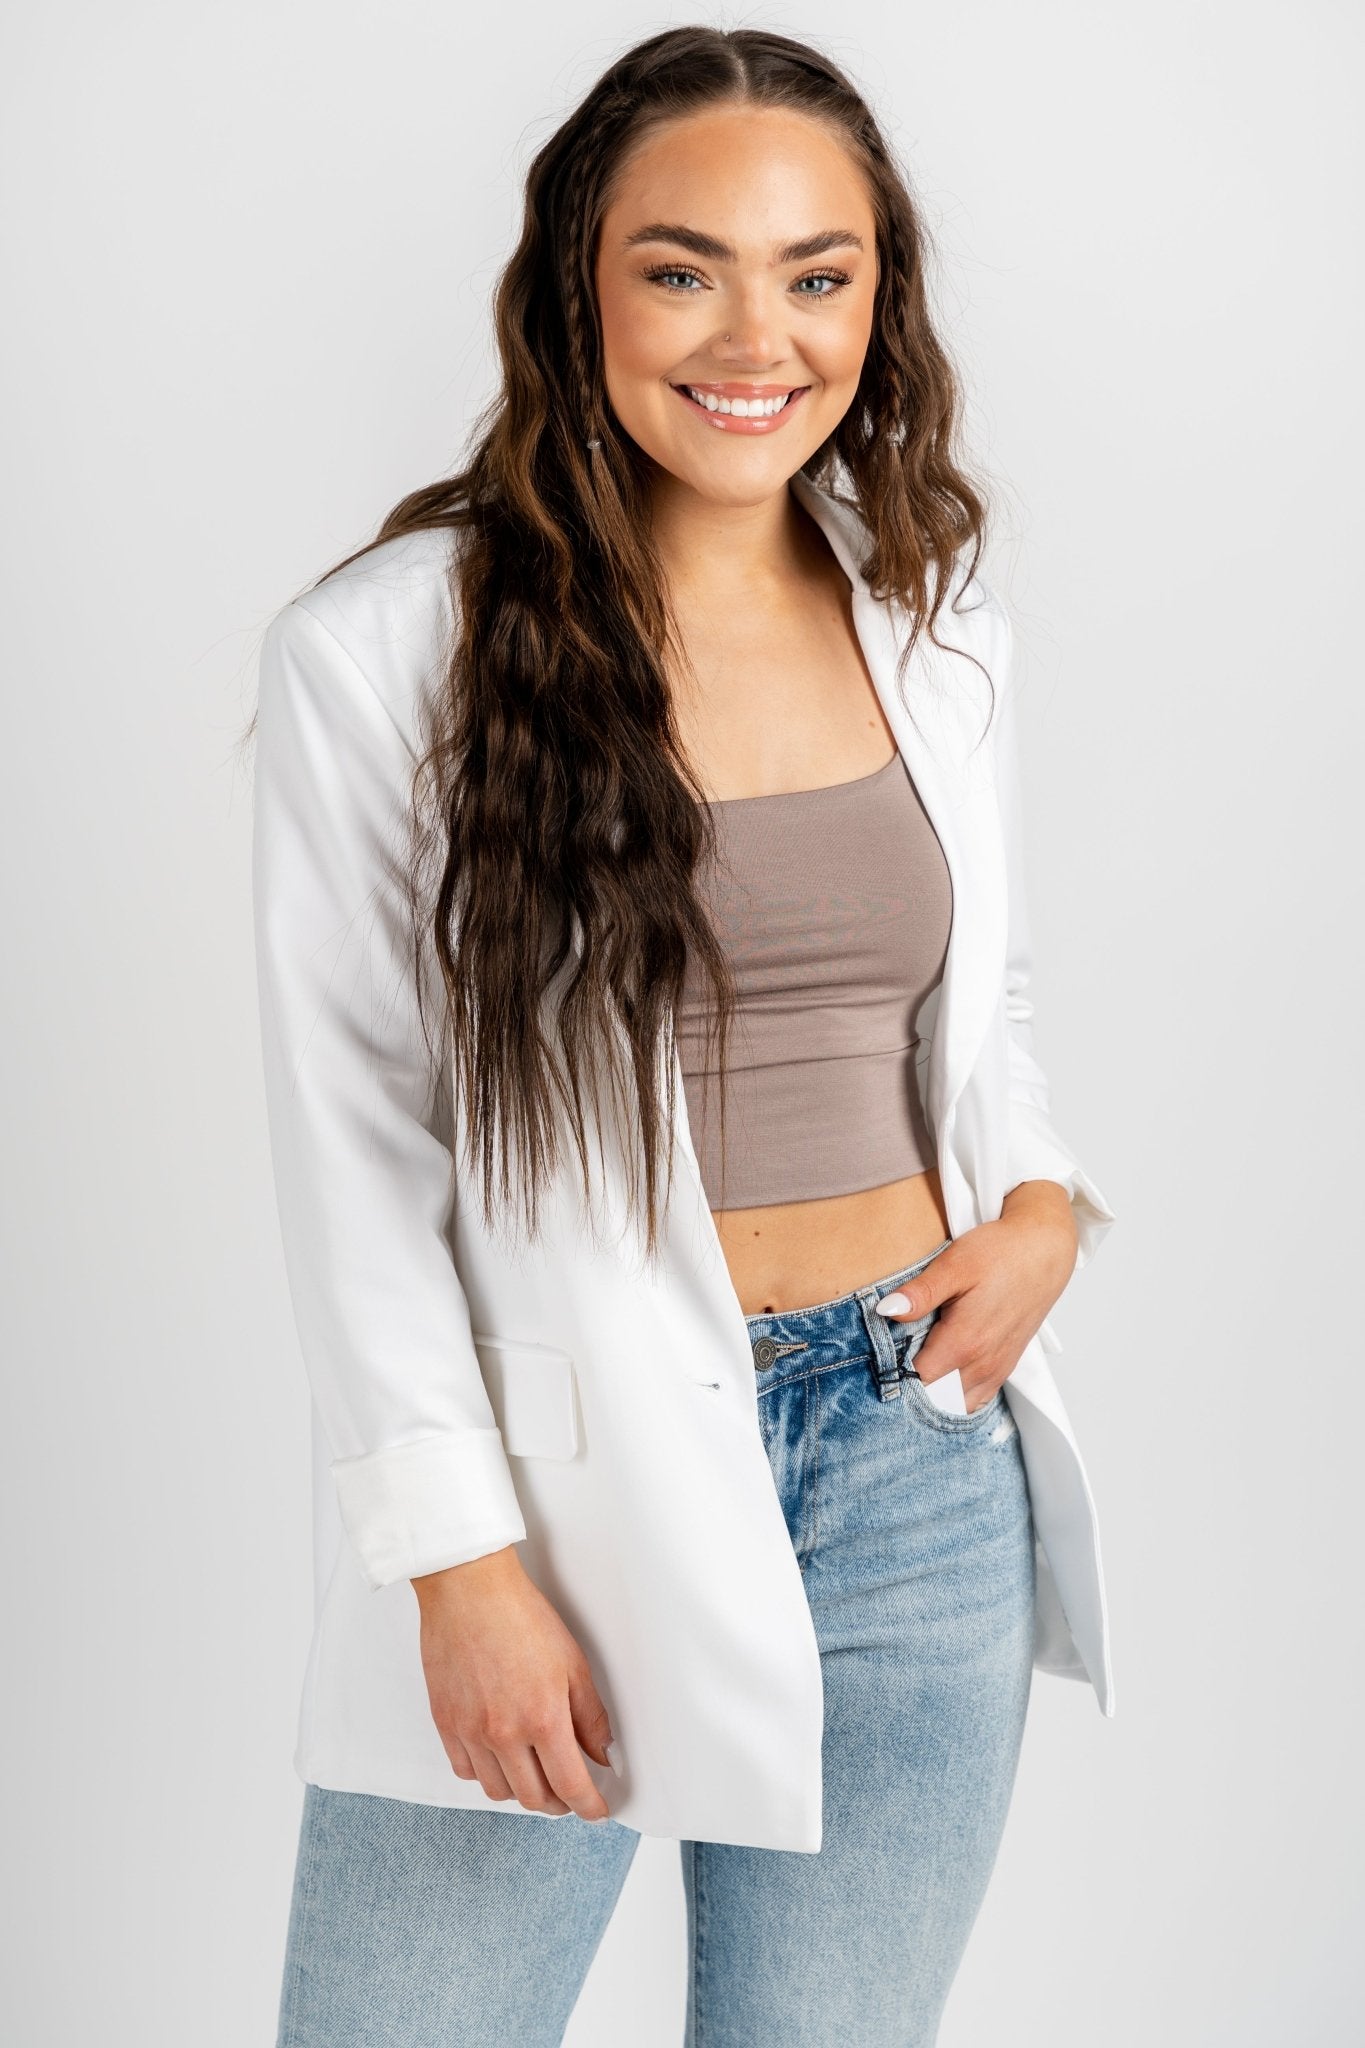 Oversized blazer off white – Affordable Blazers | Cute Black Jackets at Lush Fashion Lounge Boutique in Oklahoma City